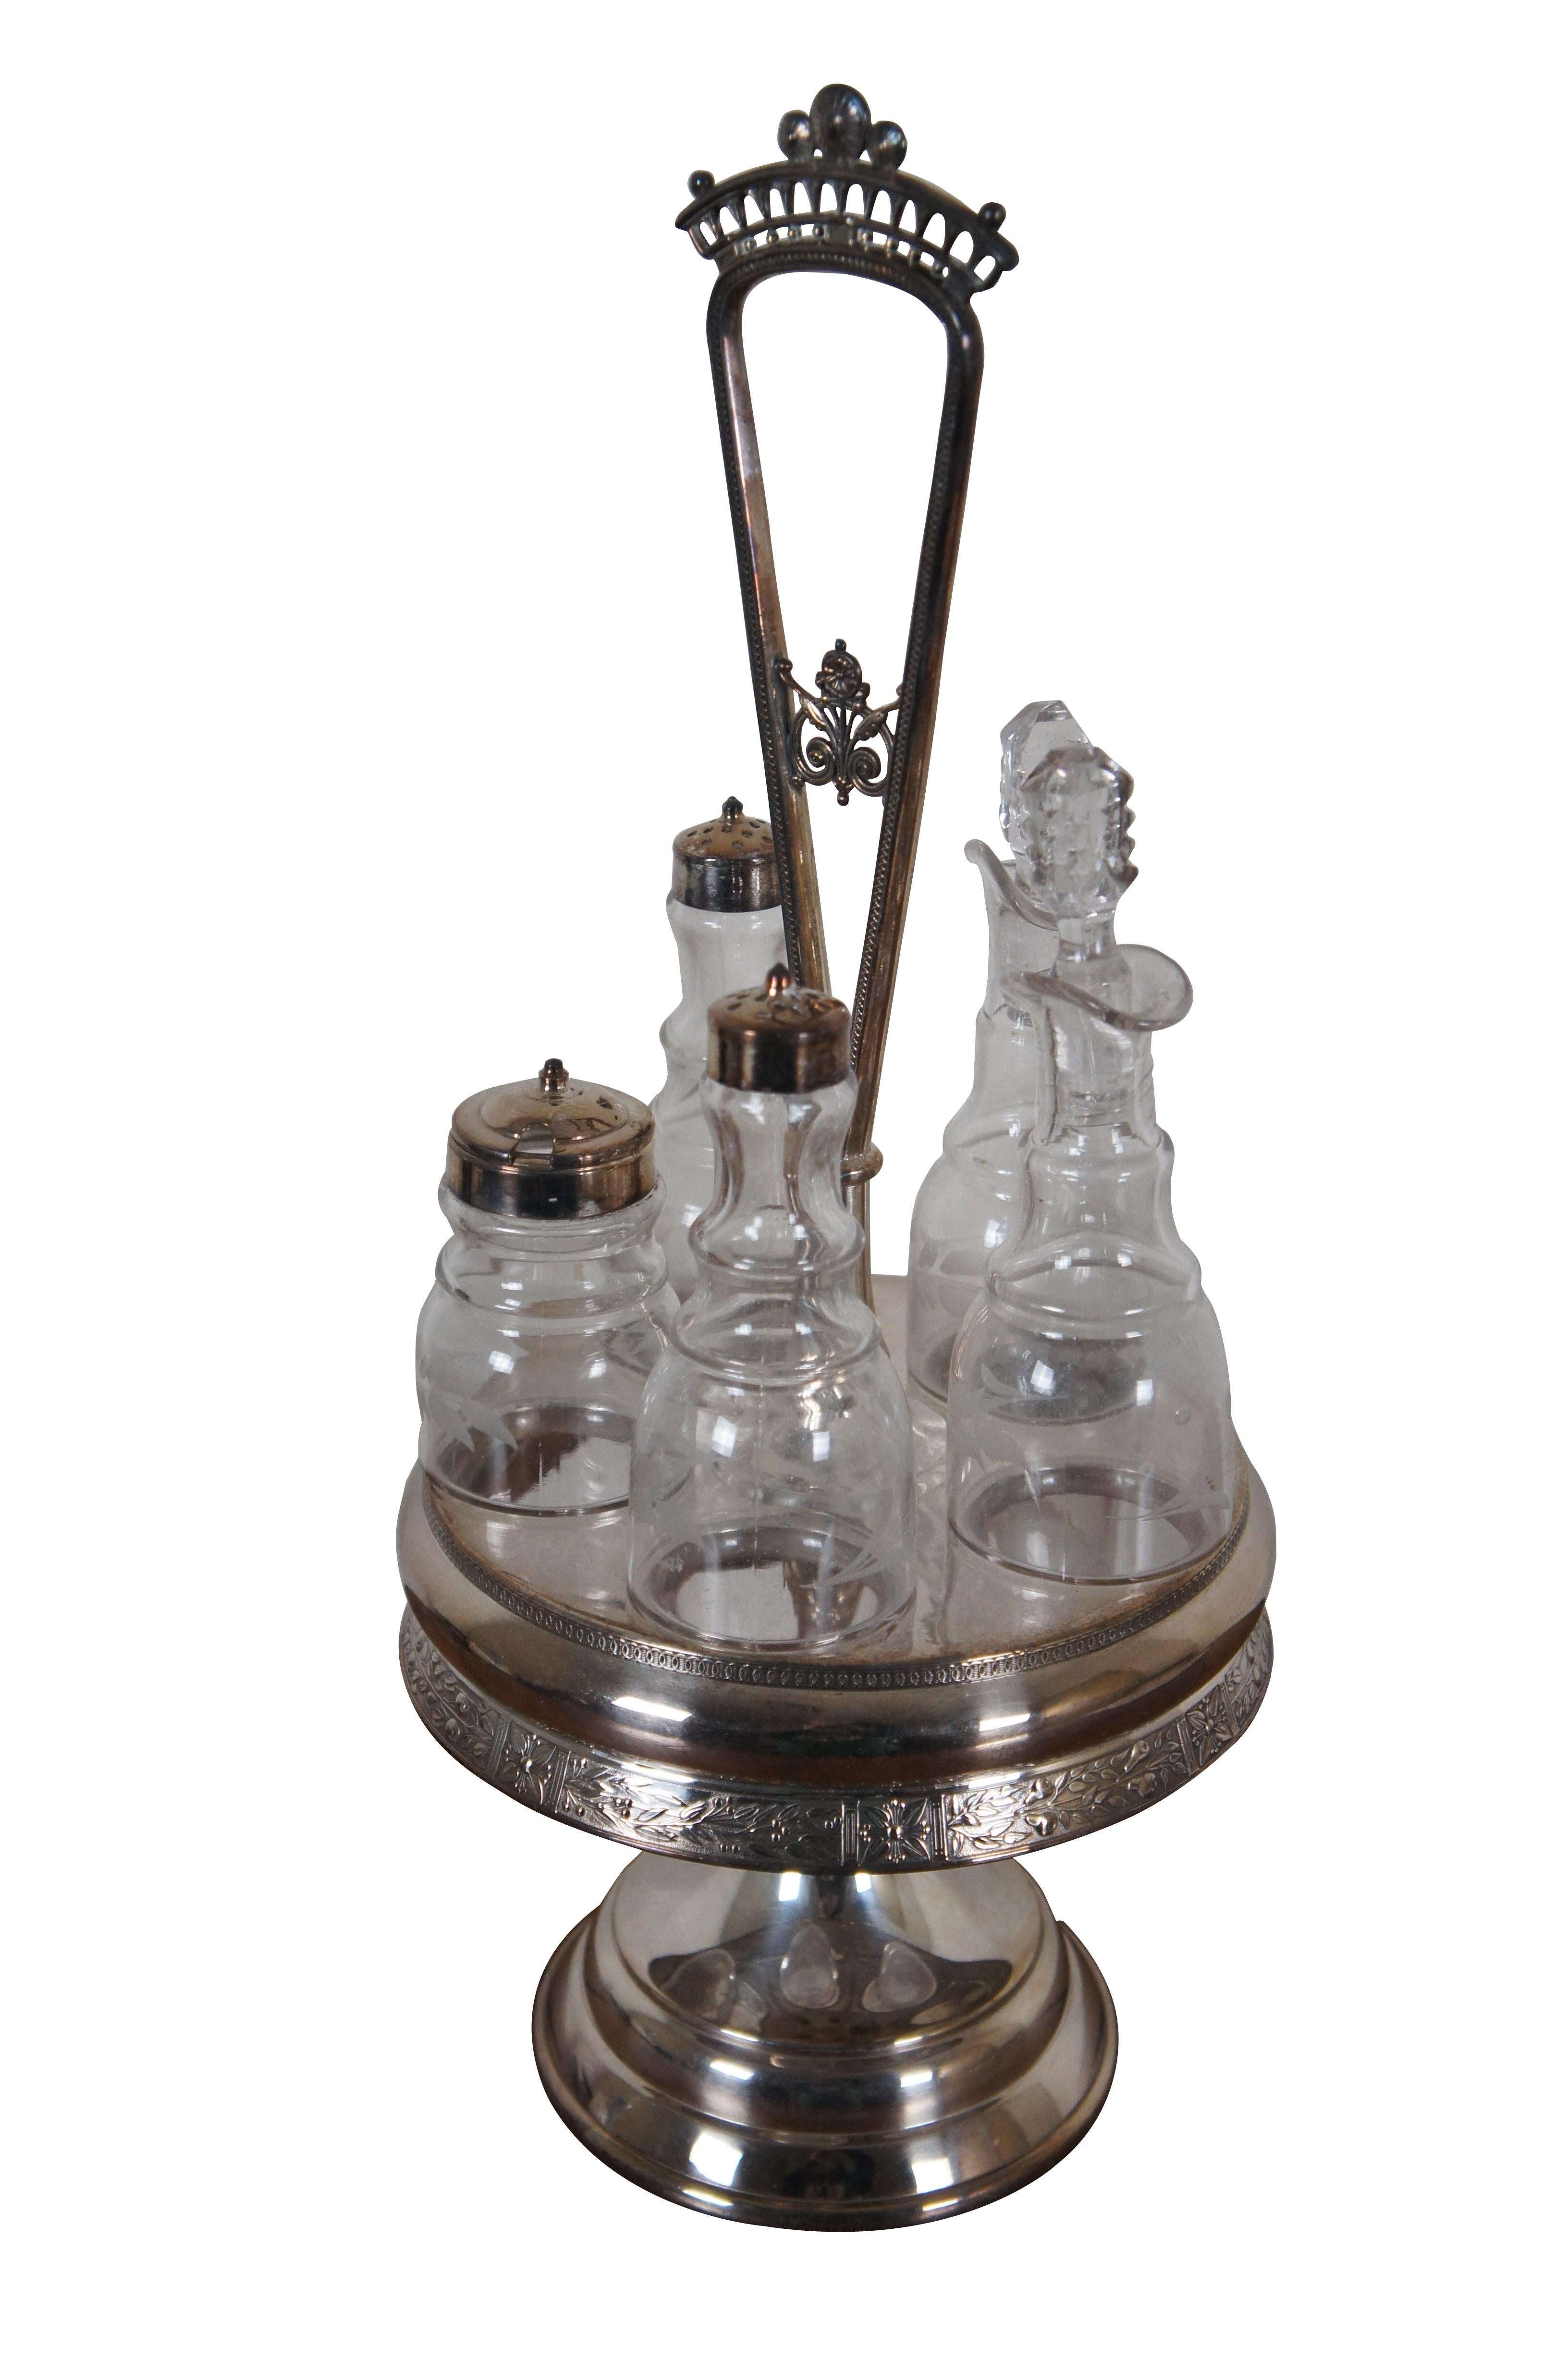 Antique Victorian Reed & Barton cruet condiment set featuring pressed and etched glass bottles with ornate footed silverplate caddy

